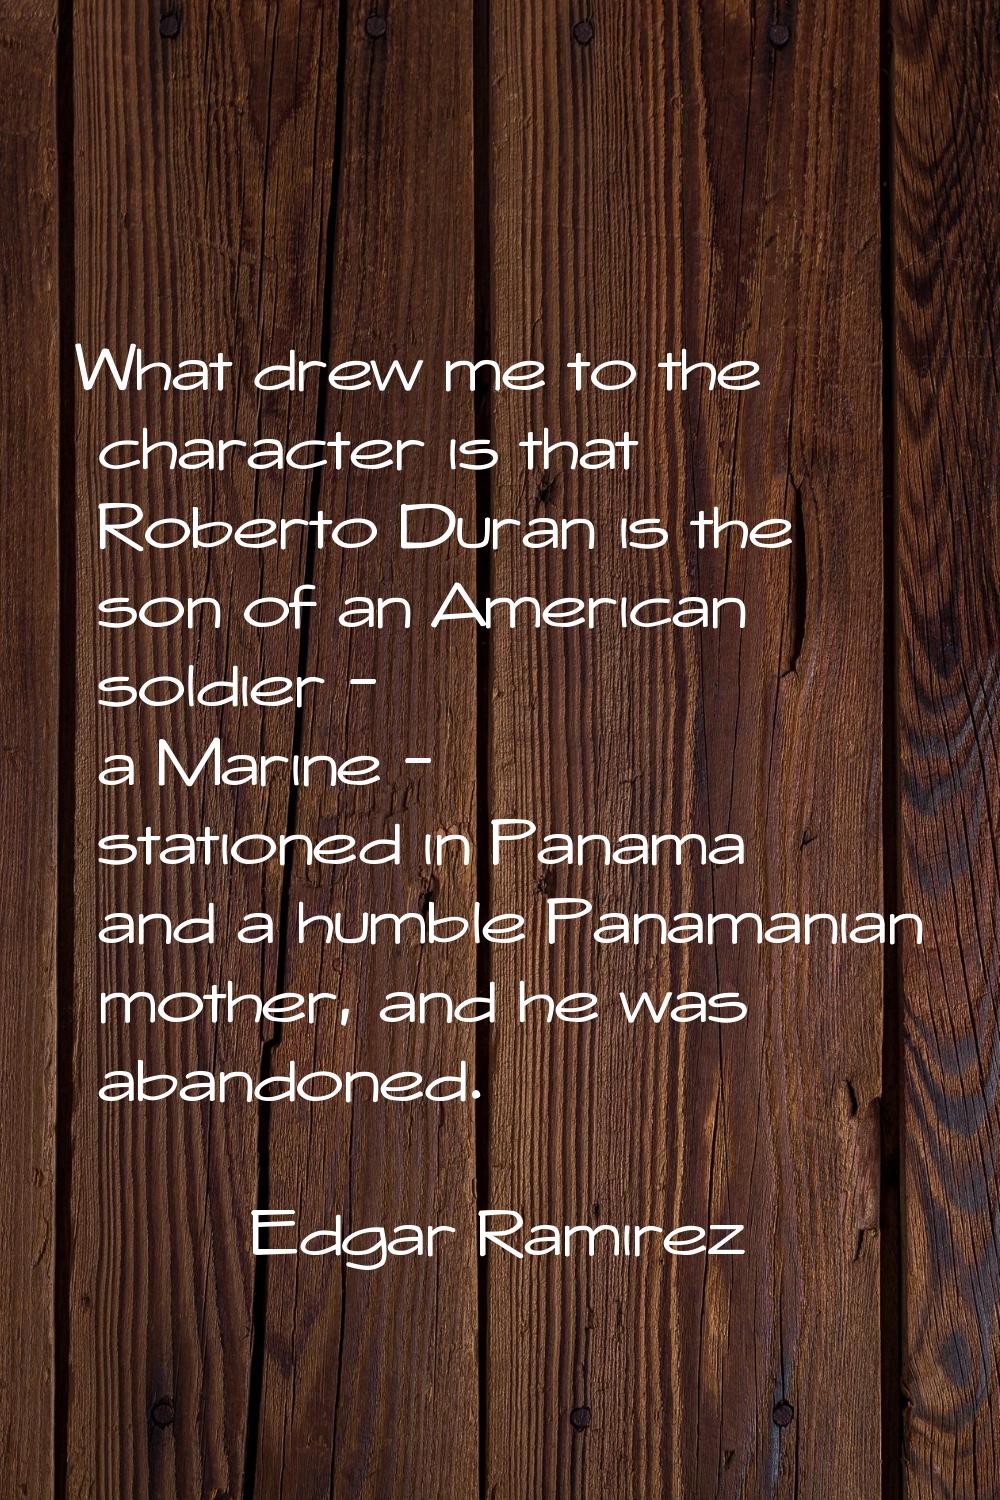 What drew me to the character is that Roberto Duran is the son of an American soldier - a Marine - 